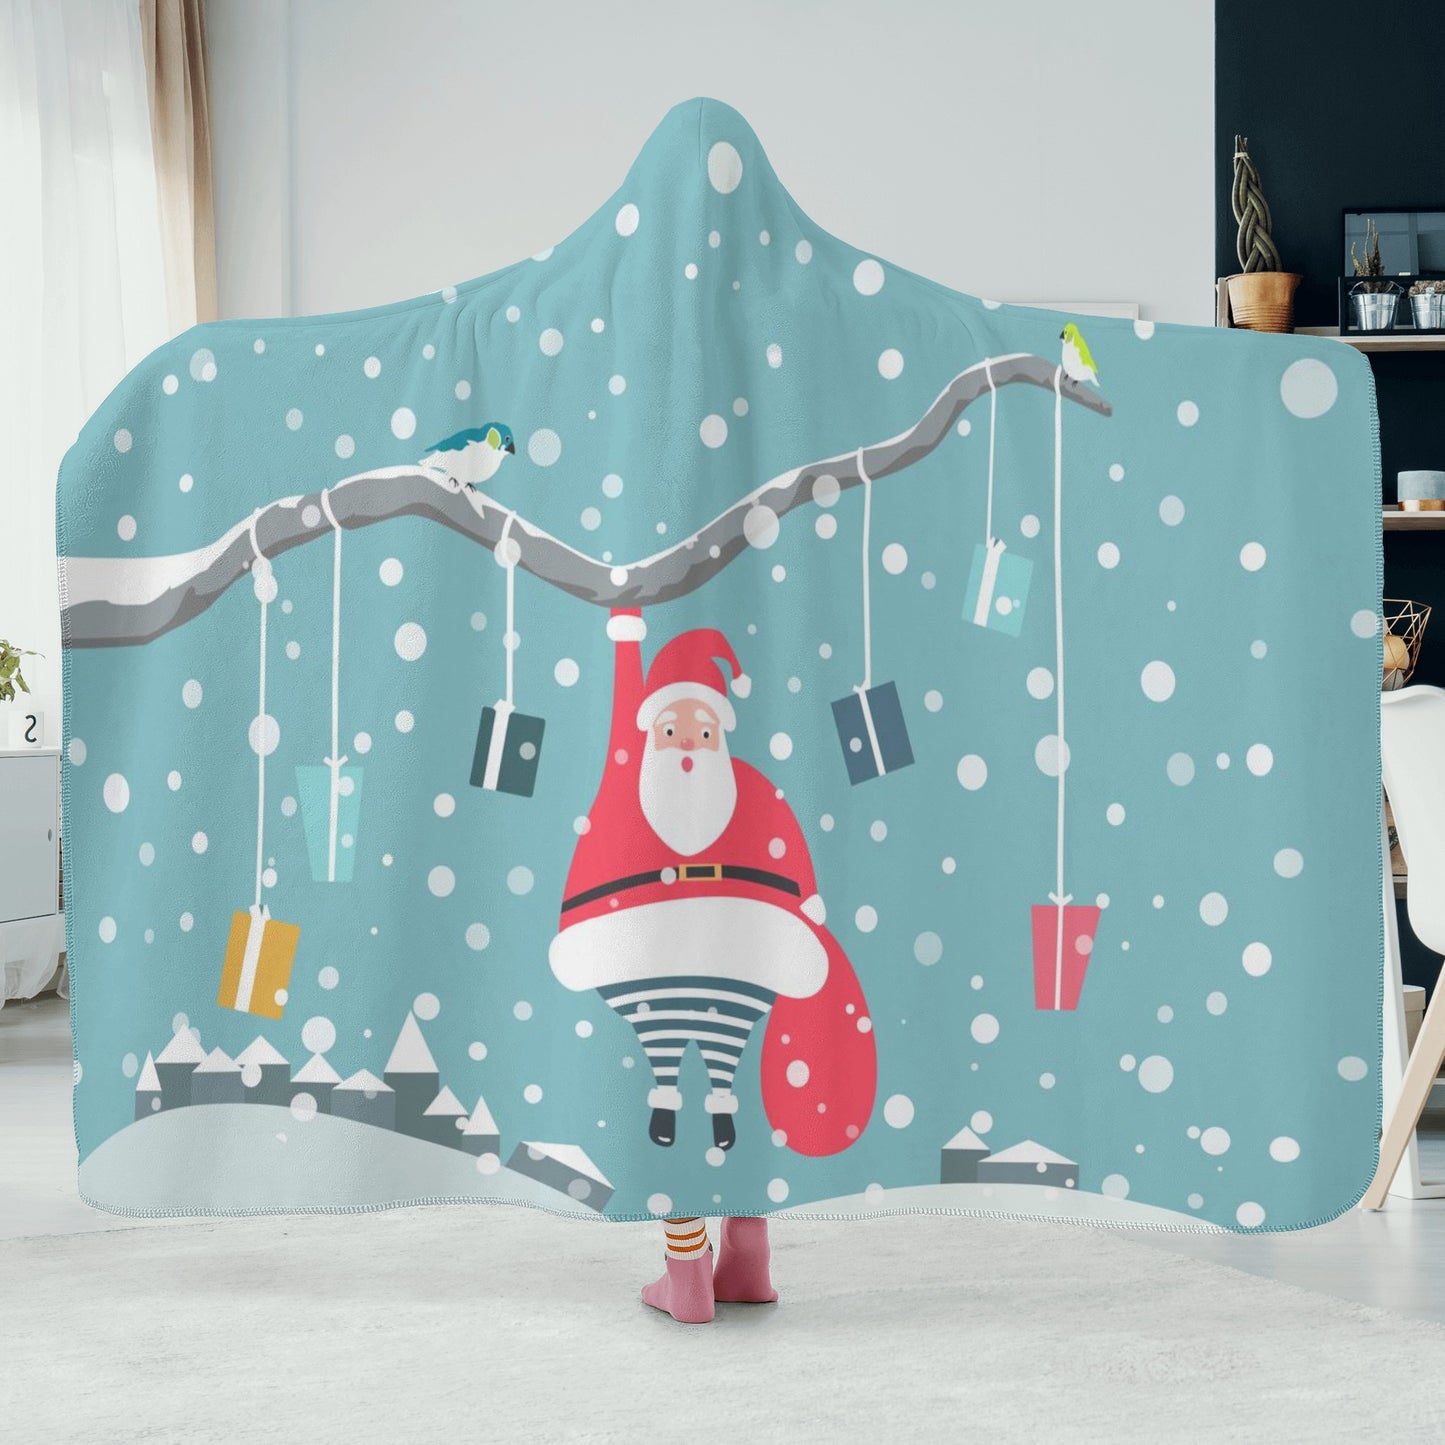 Santa is Hanging Around with this Hooded Blanket